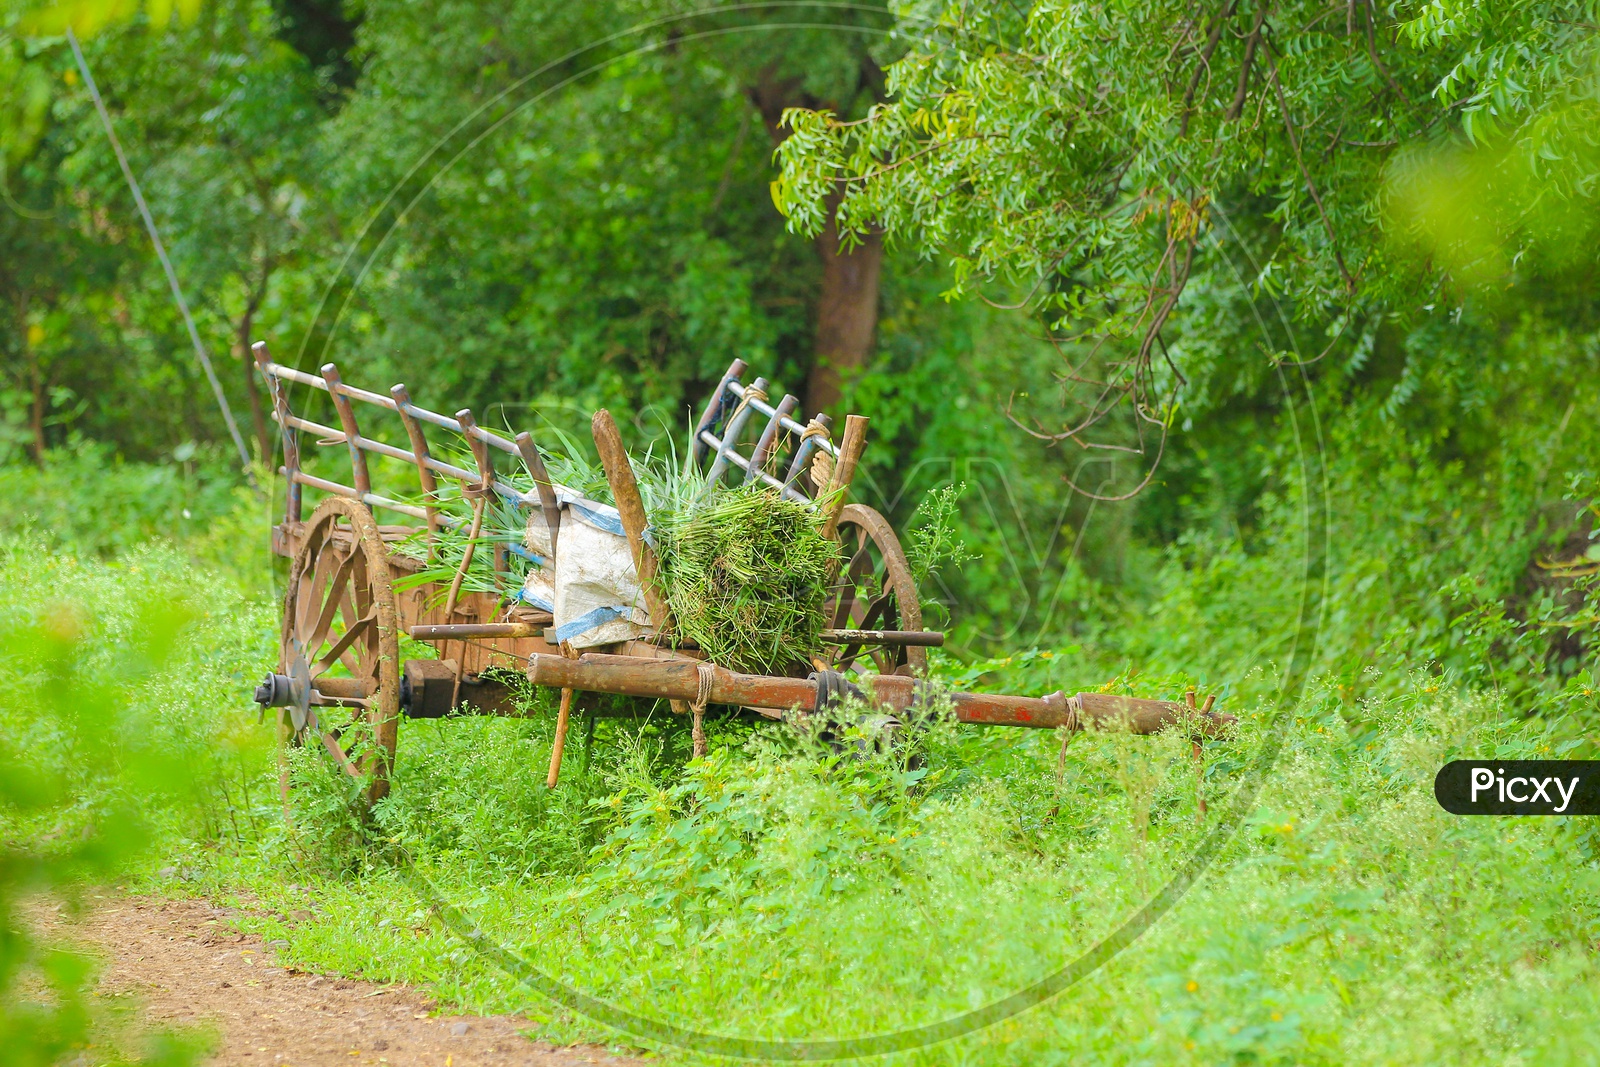 Bullock Cart loaded with Grass rested in Agriculture field